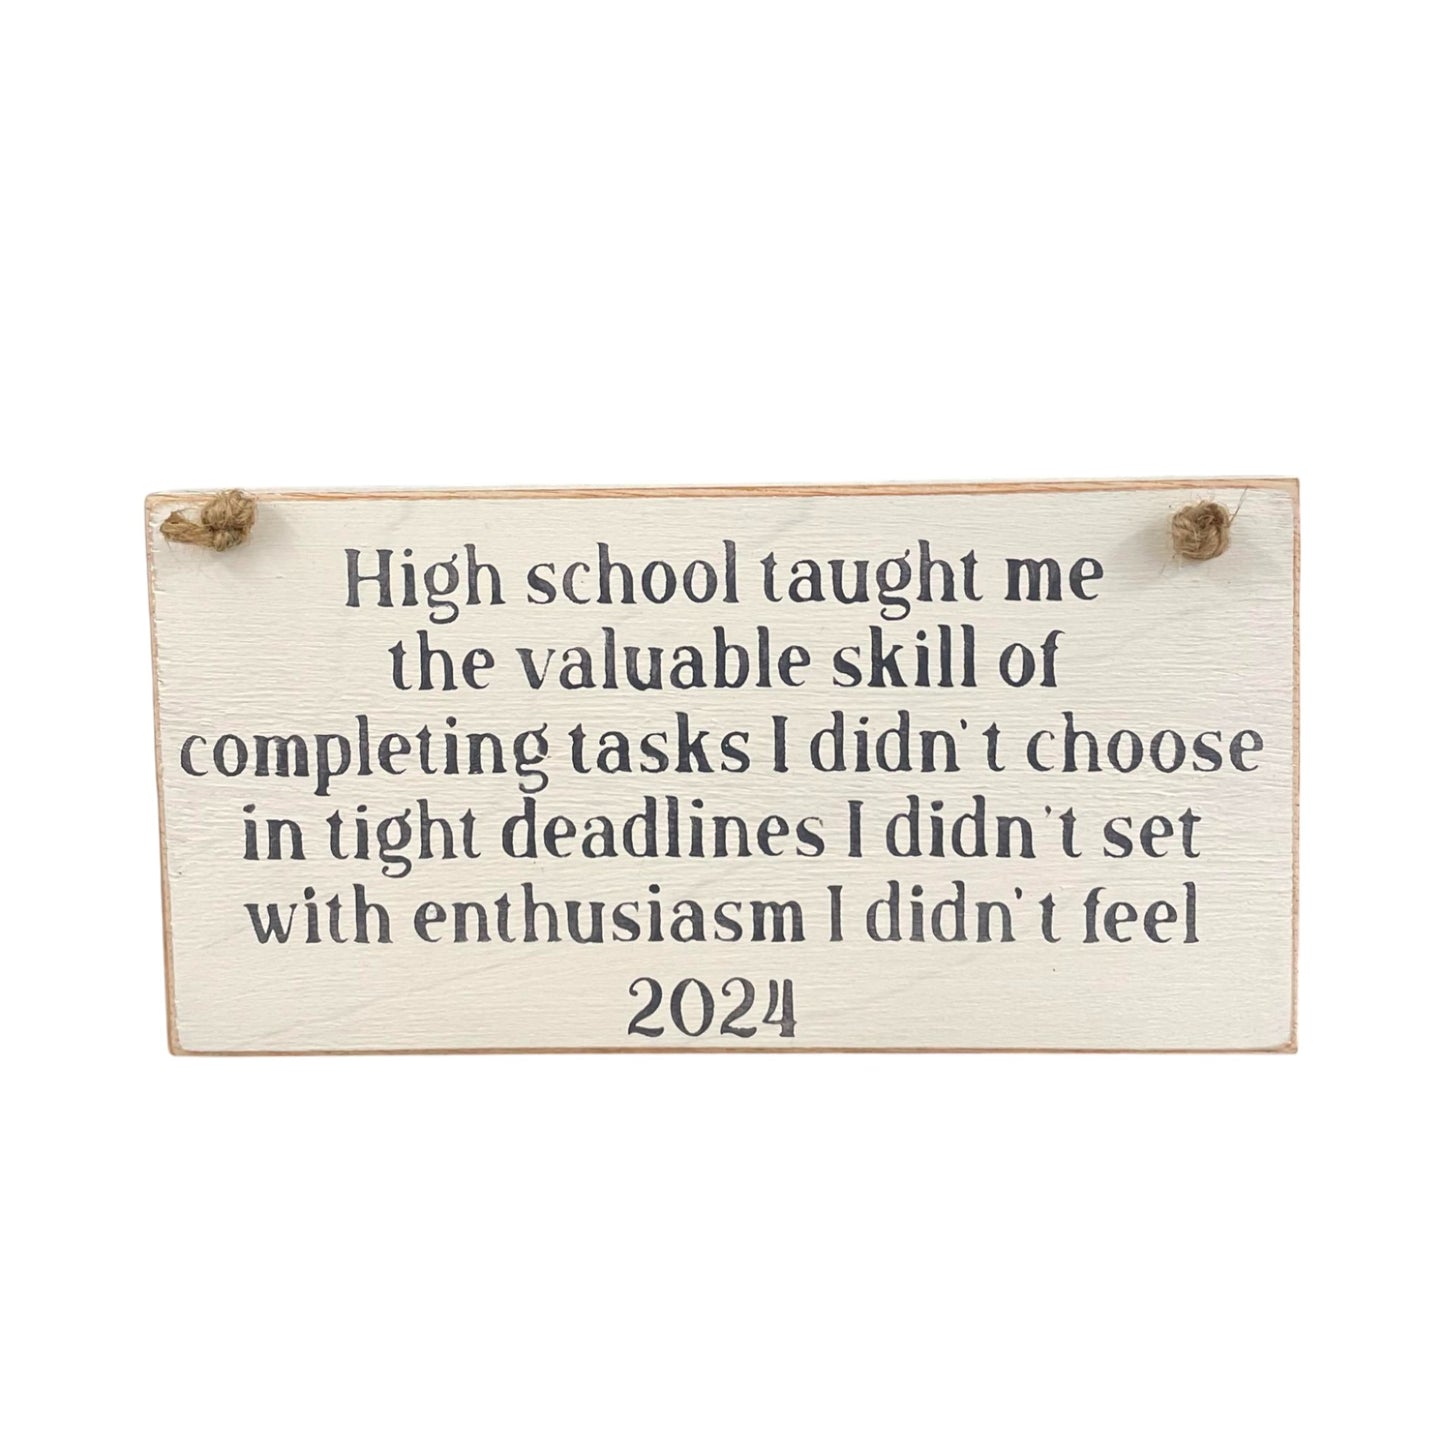 Wood sign with humorous text: 'High school taught me the valuable skill of completing tasks I didn't choose in tight deadlines I didn't set with enthusiasm I didn't feel' - Graduation Gift 2024